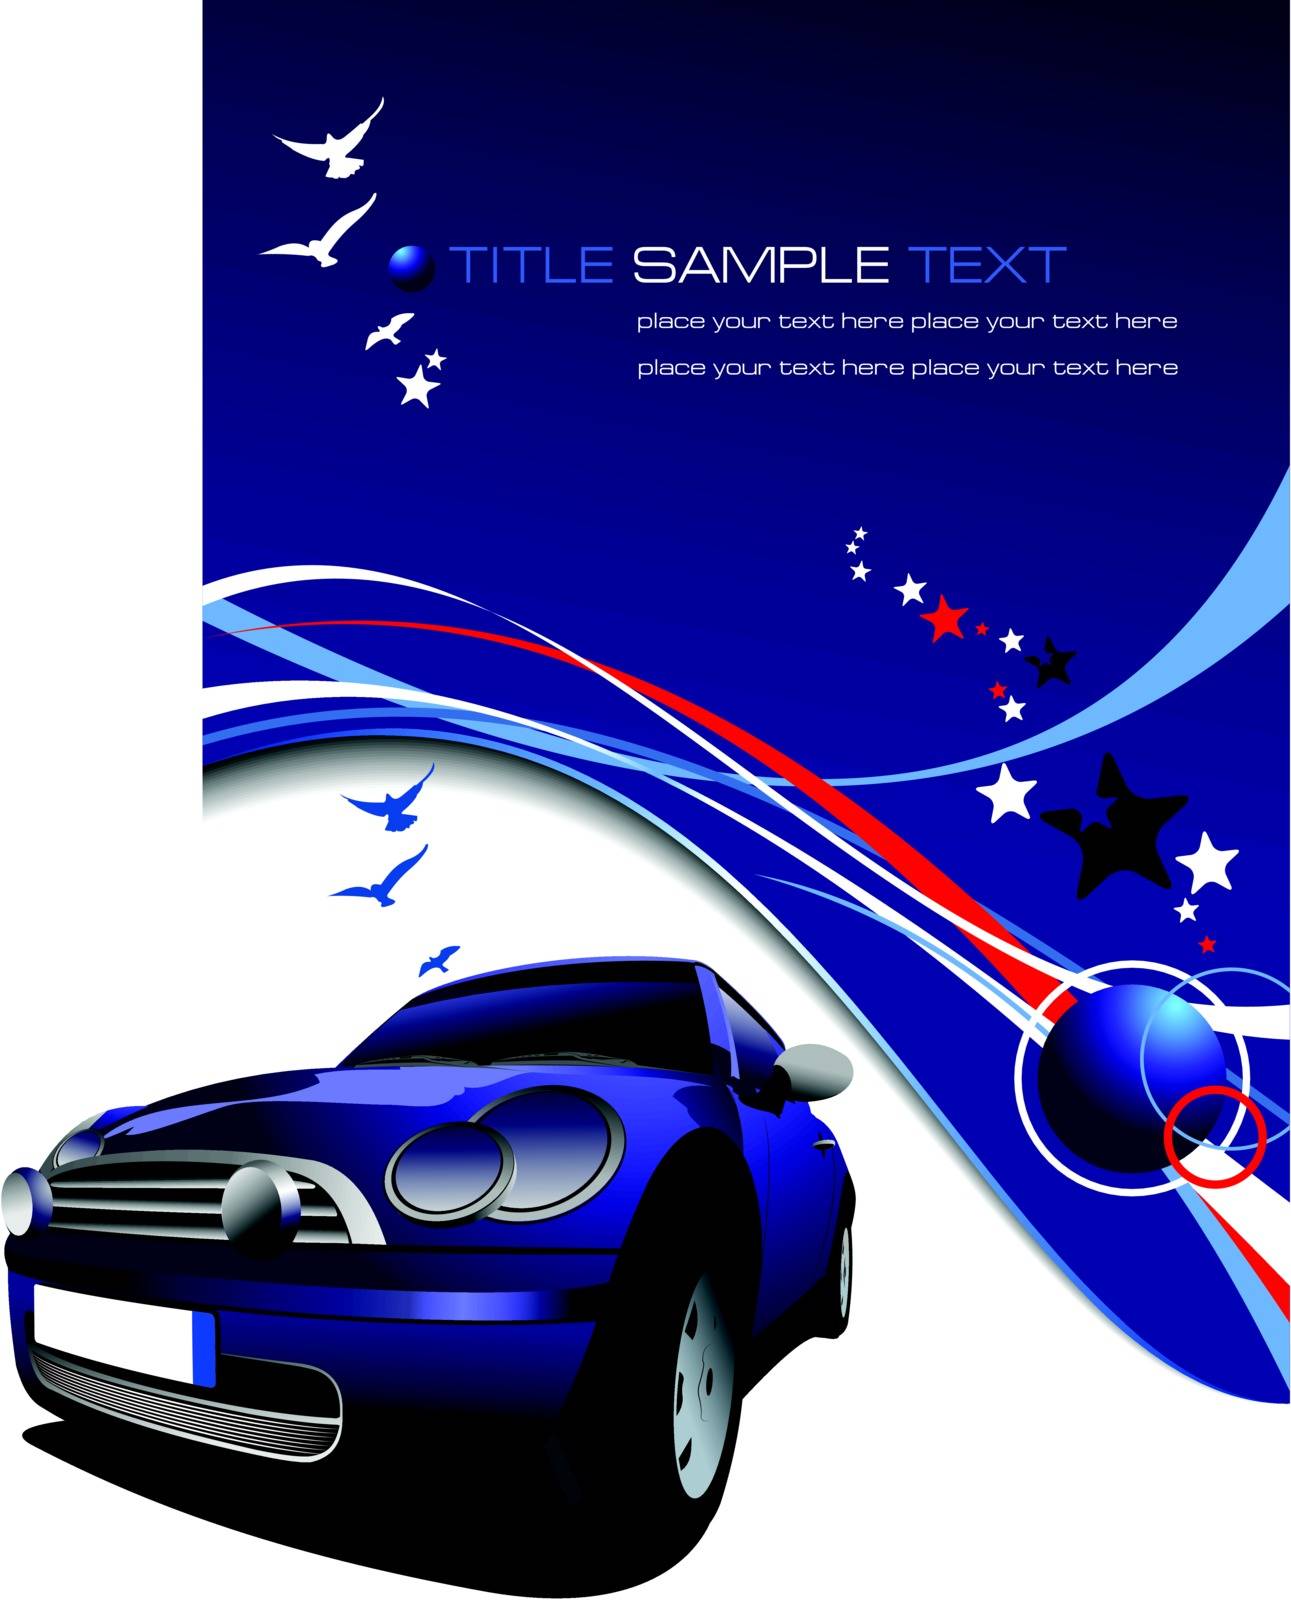 Blue background with blue car, stars and blue birds images . Vector illustration